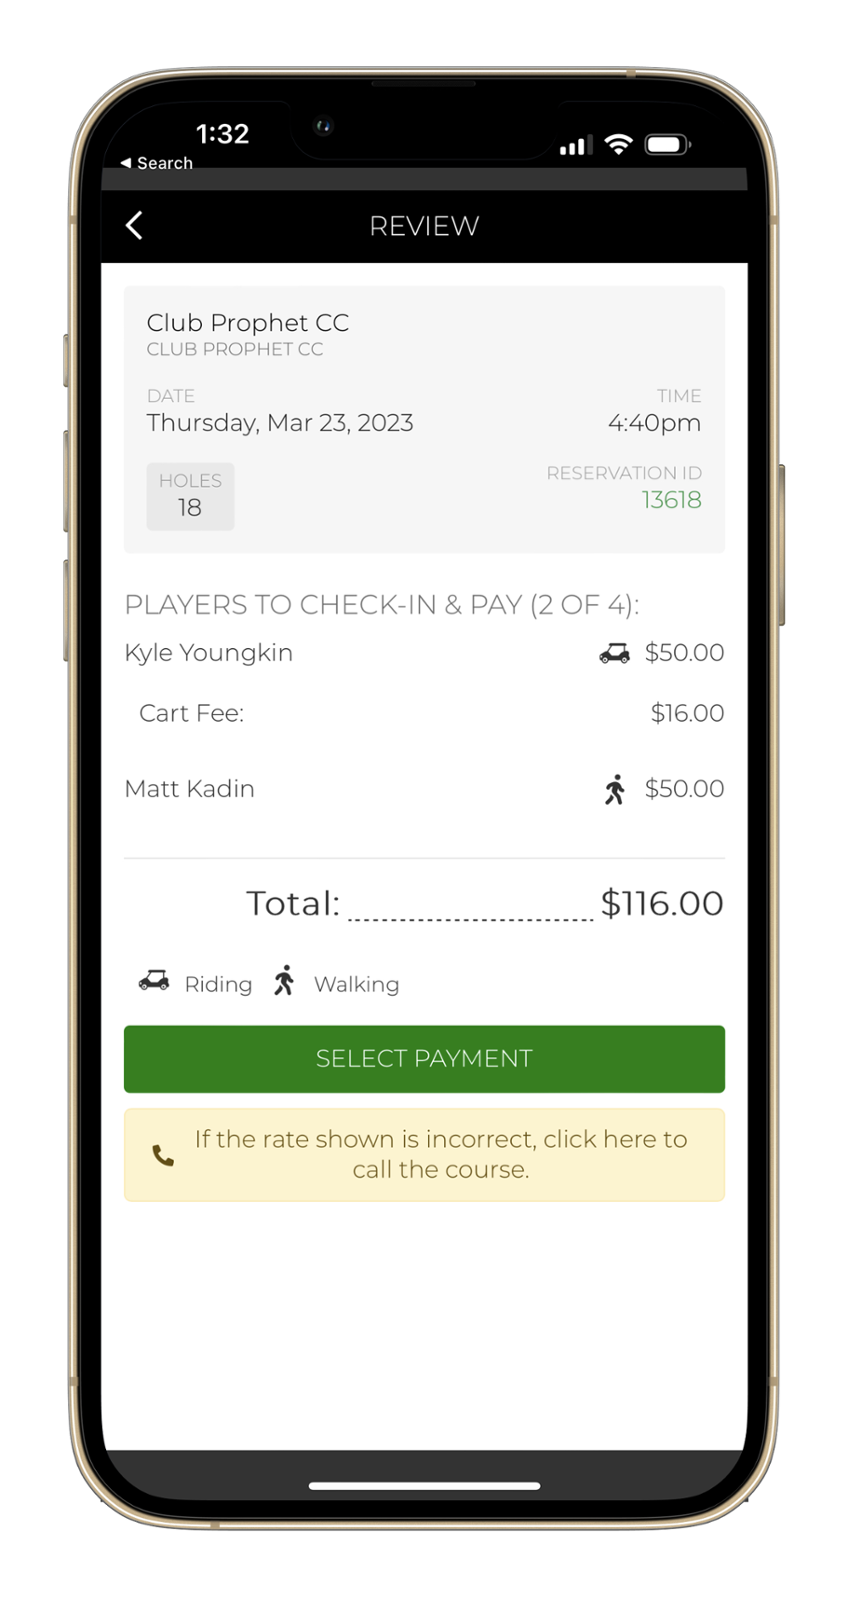 Conveniently pay for your round through mobile check-in